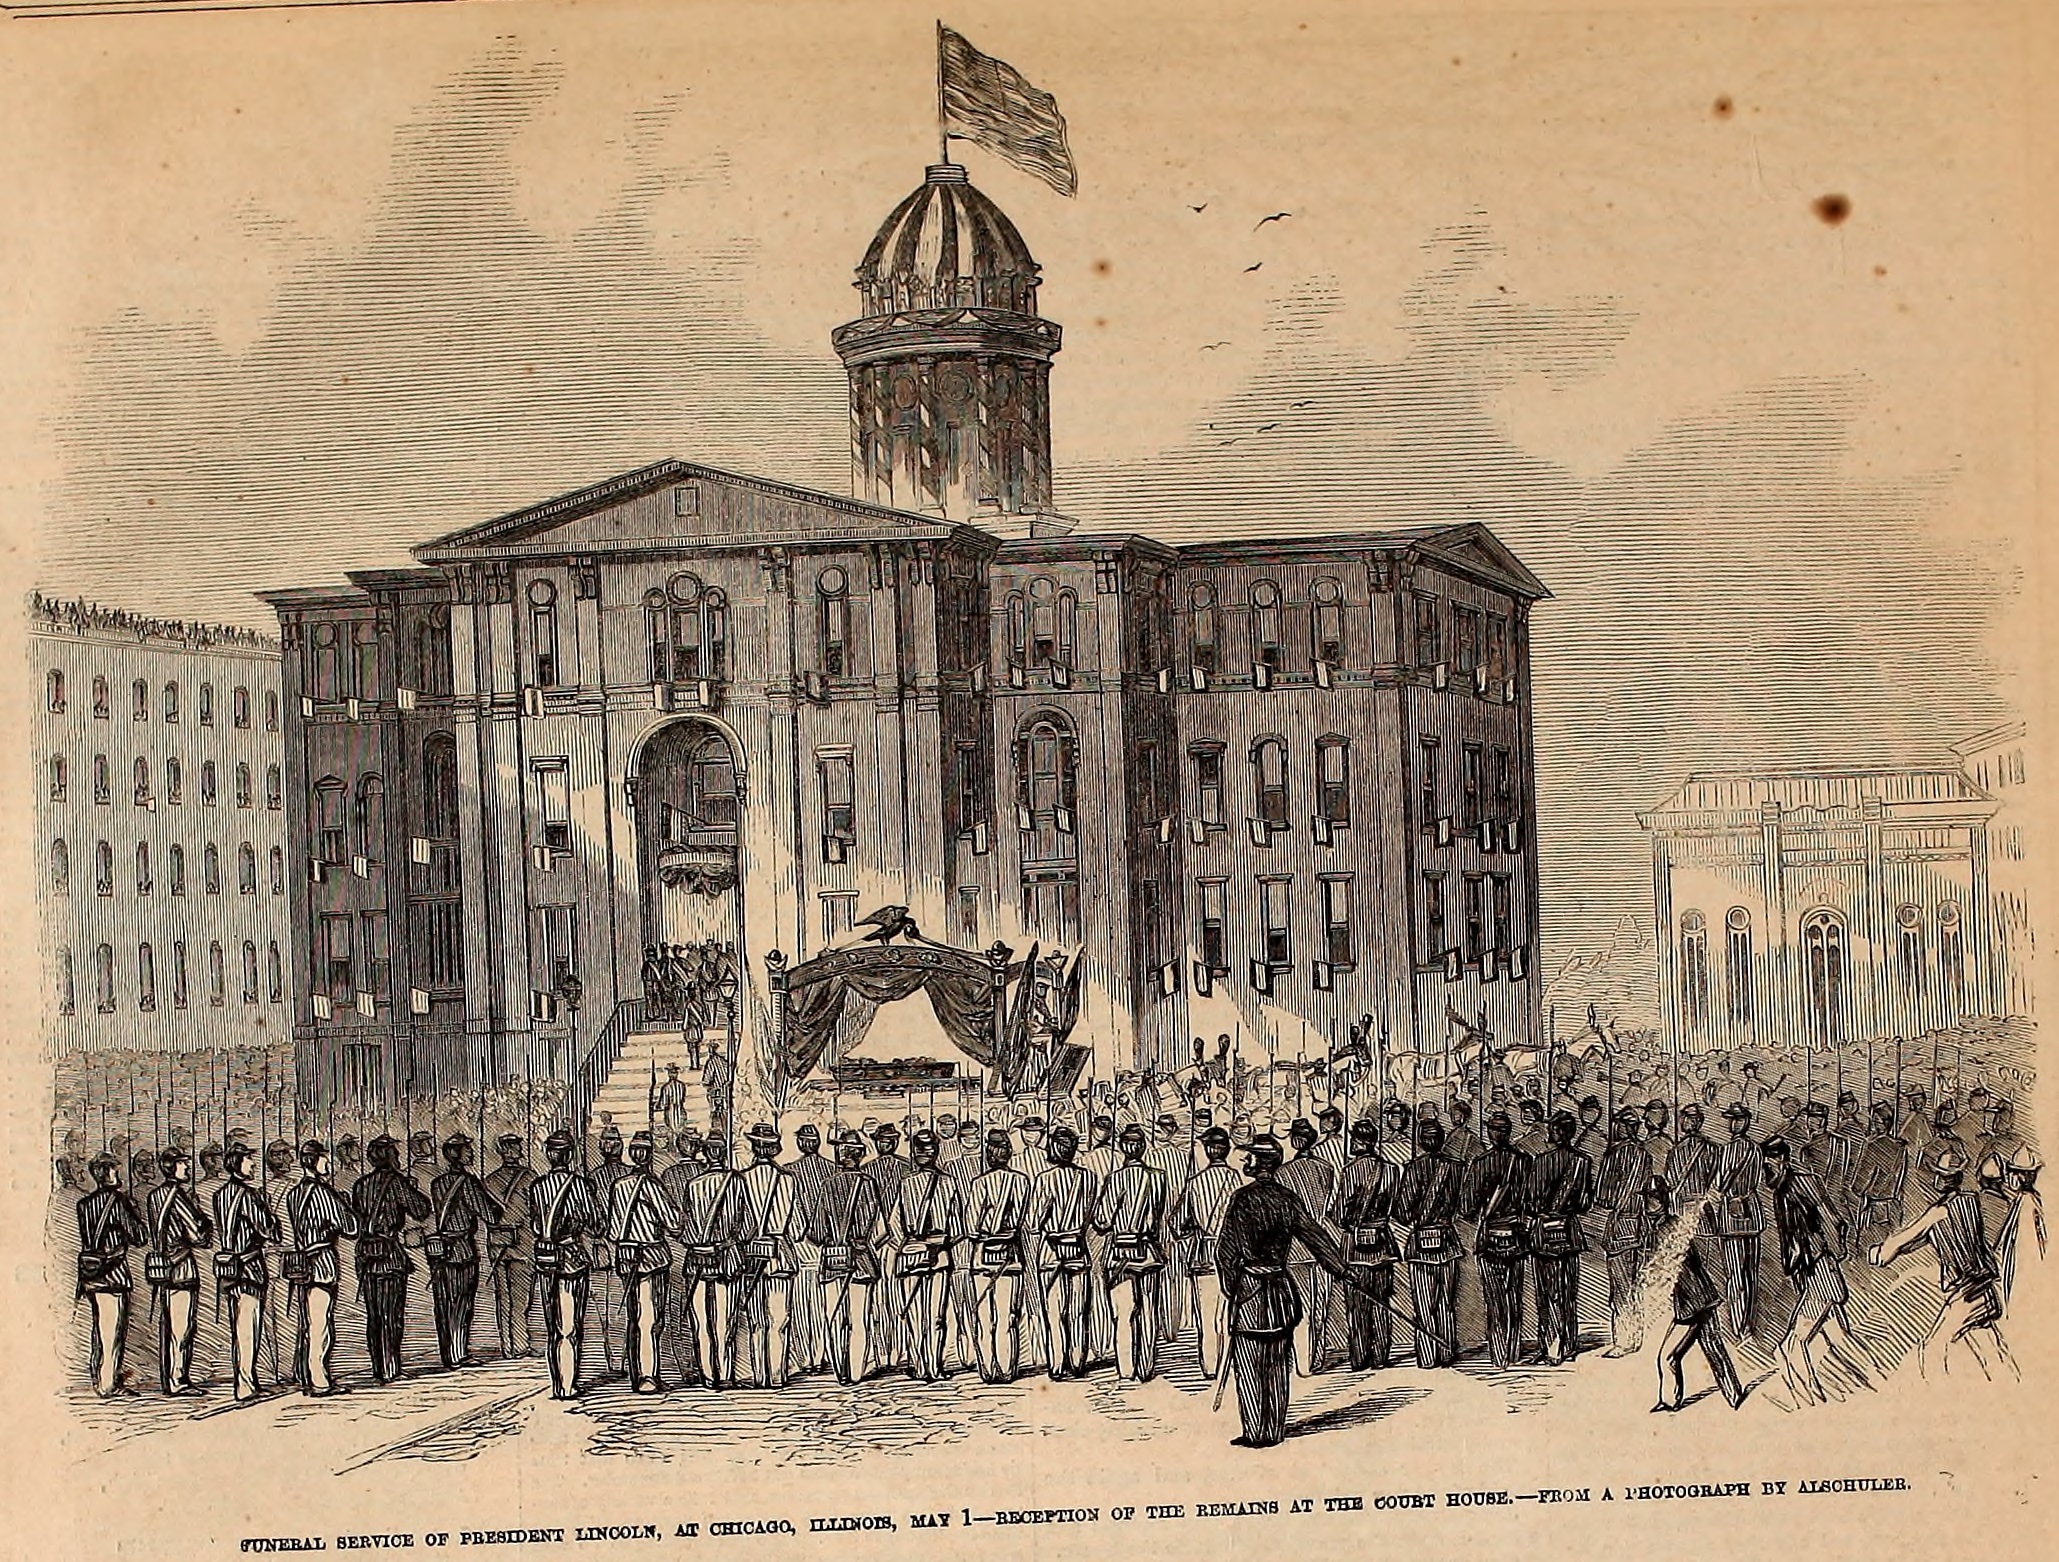 President Lincoln's Funeral Service in Chicago, IL - Frank Leslie's Illustrated Newspaper Drawing